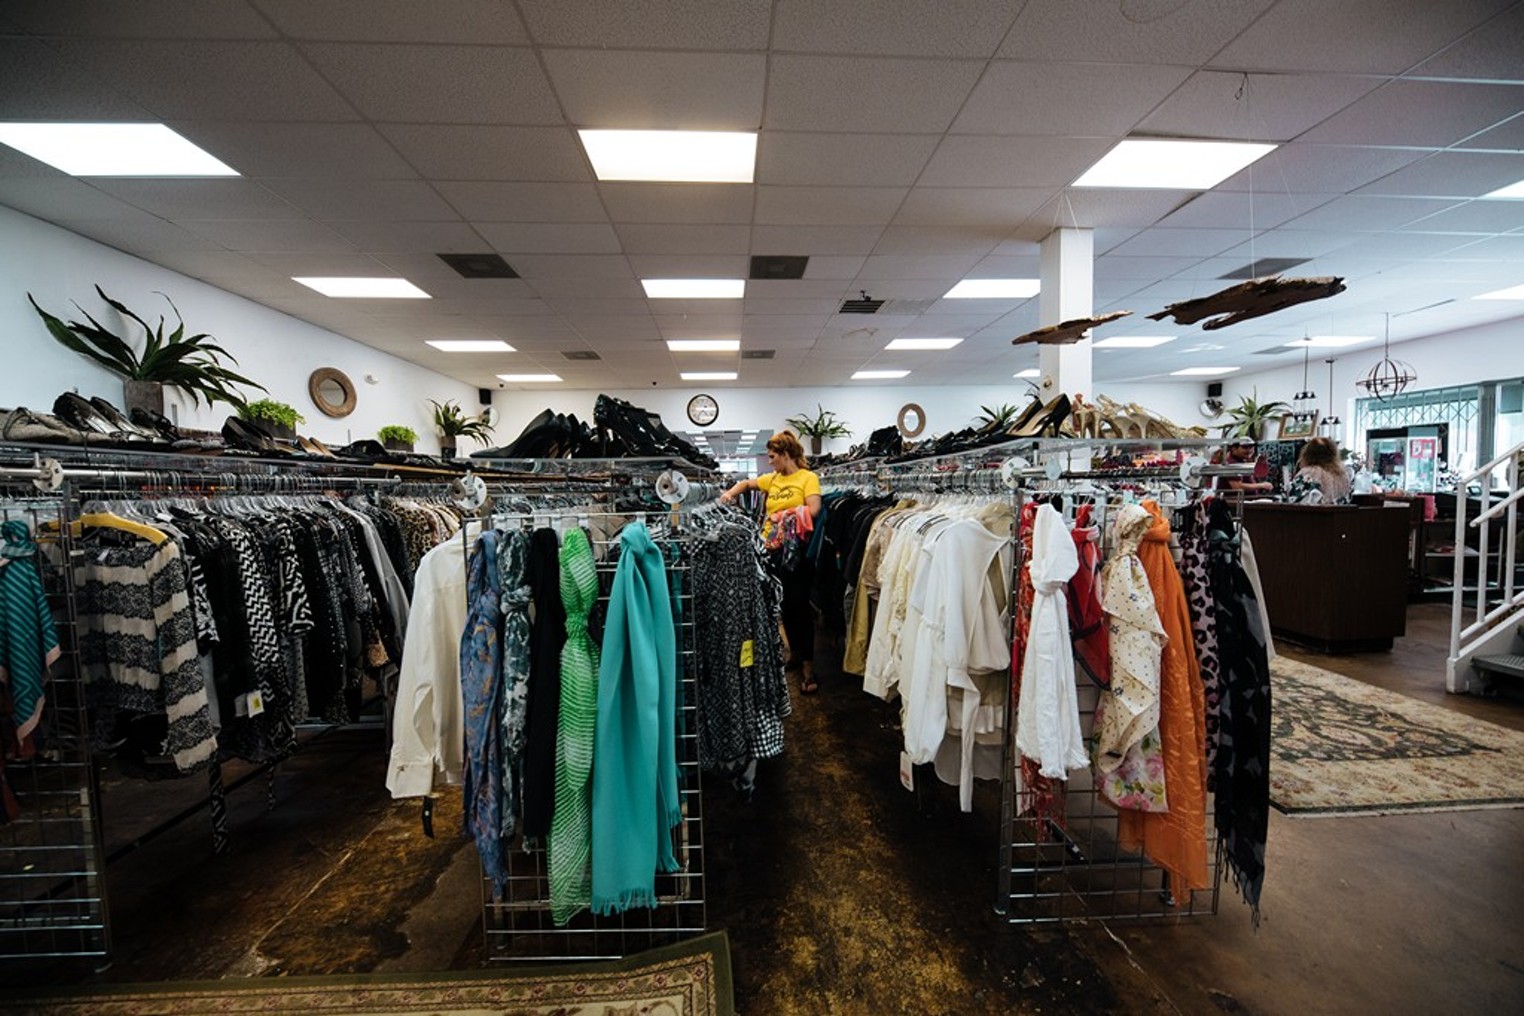 Consignment shop fills plus-size clothing niche in FW, PHOTOS